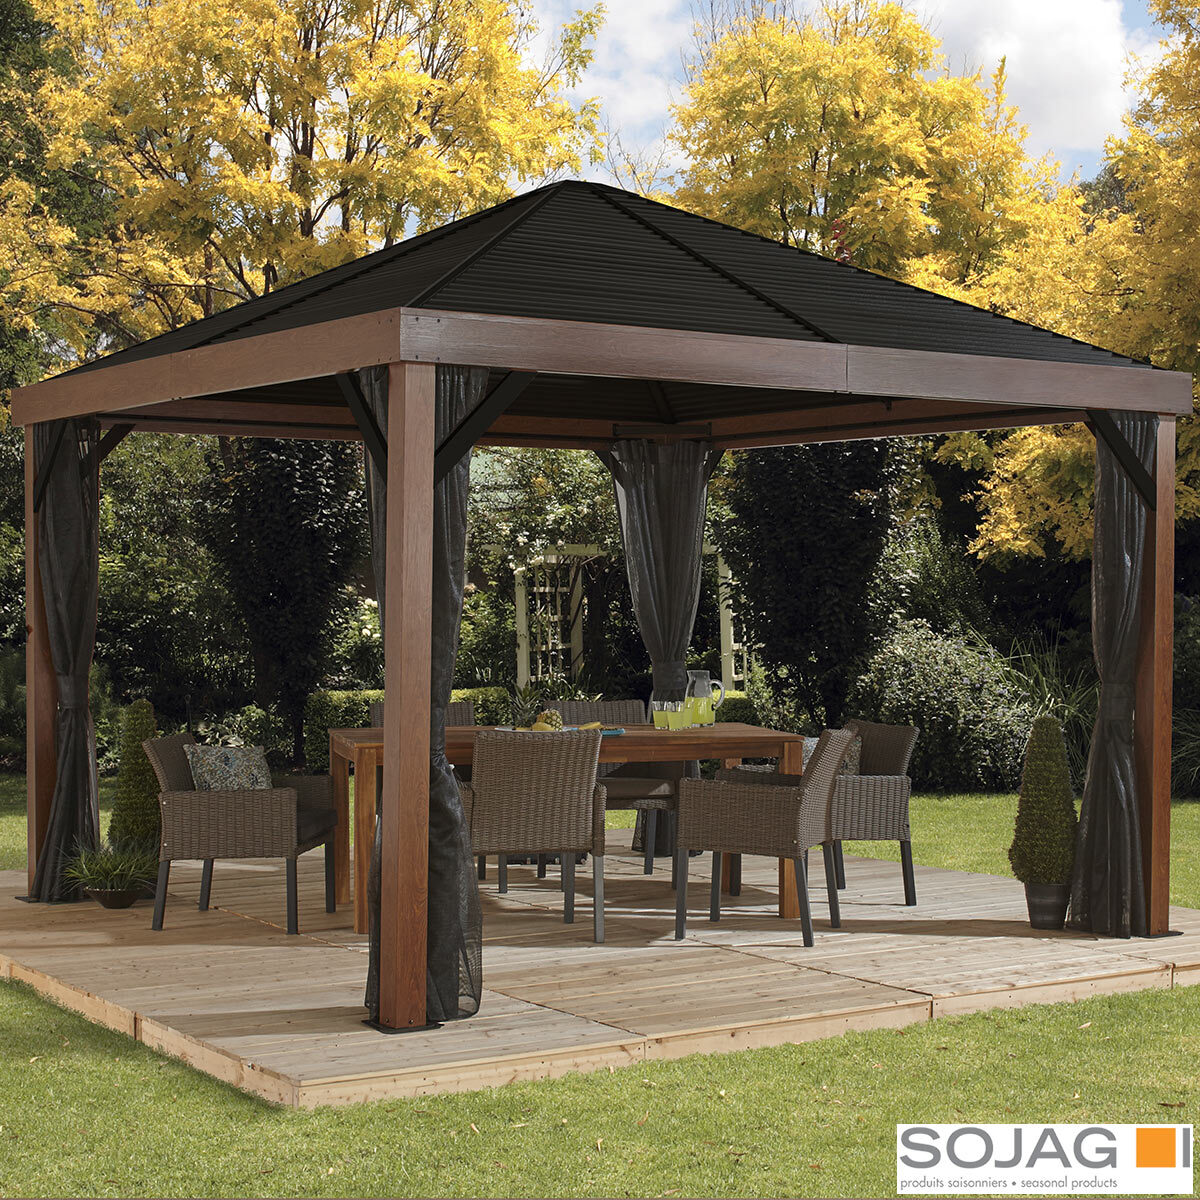 Sojag Valencia 12ft x 12ft (3.63 x 3.63m) Wood Look Sun Shelter with Galvanised Steel Roof + Insect Netting